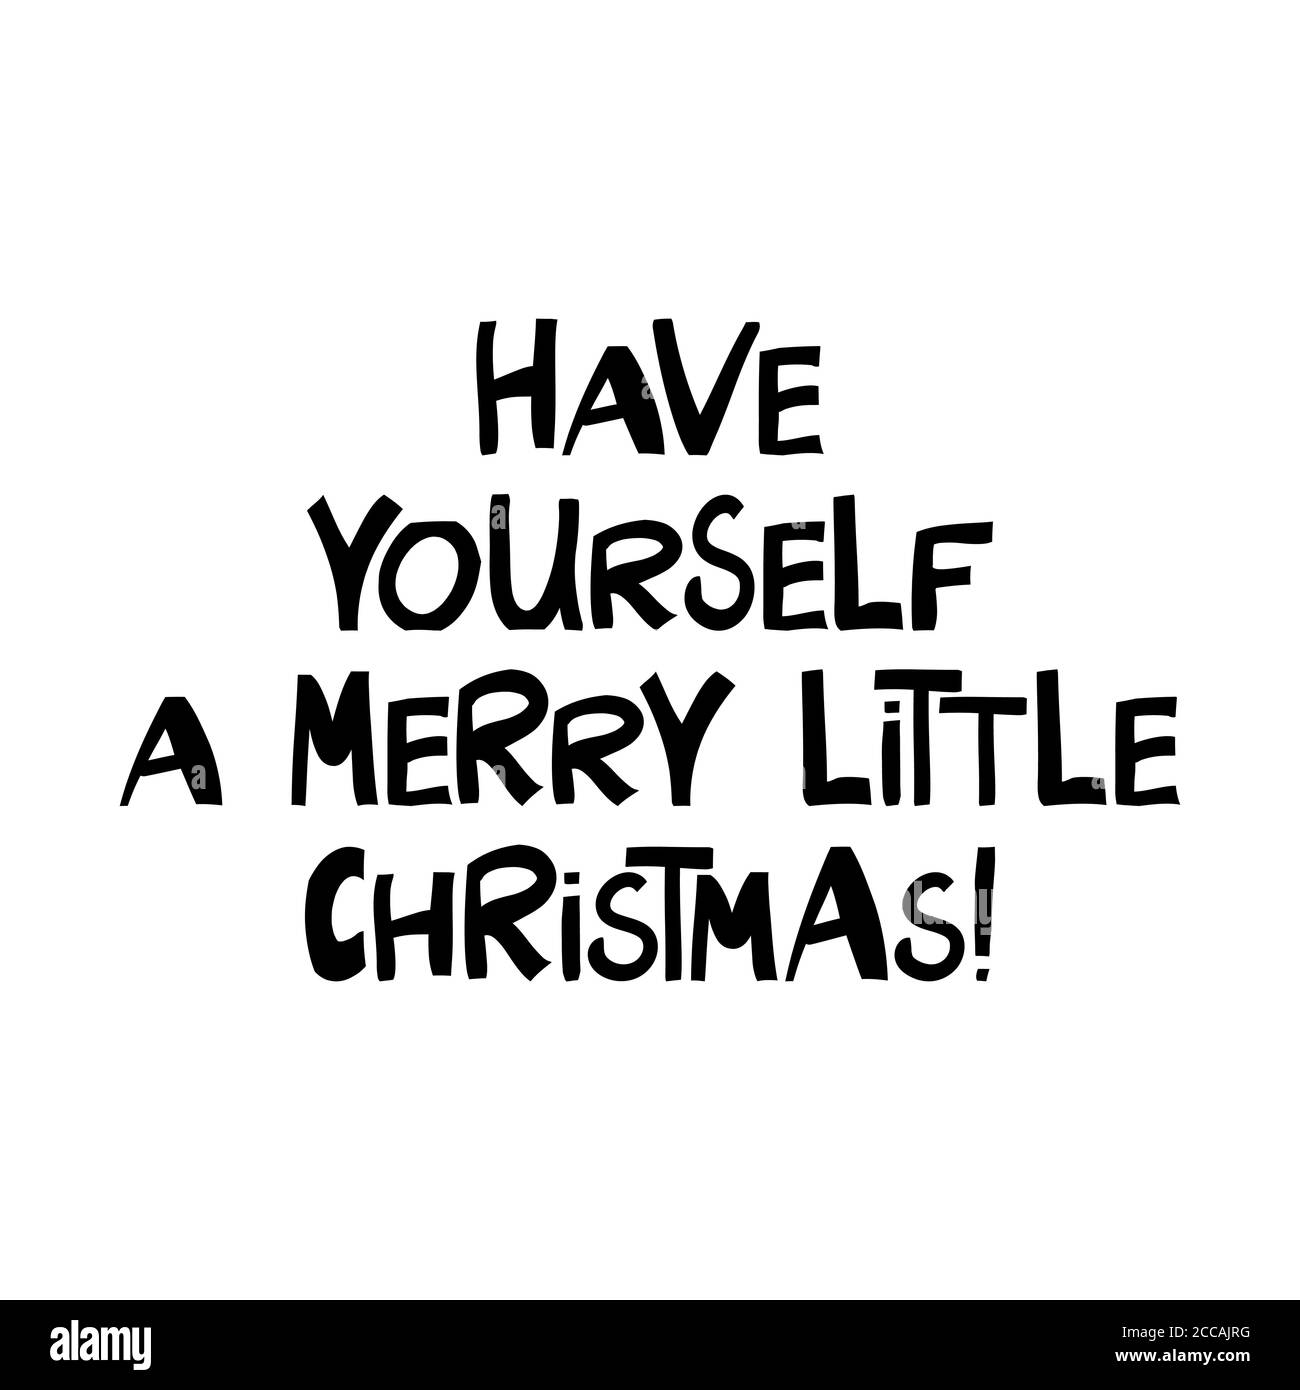 Have yourself a merry little Christmas. Winter holidays quote. Cute hand drawn lettering in modern scandinavian style. Isolated on white background Stock Vector